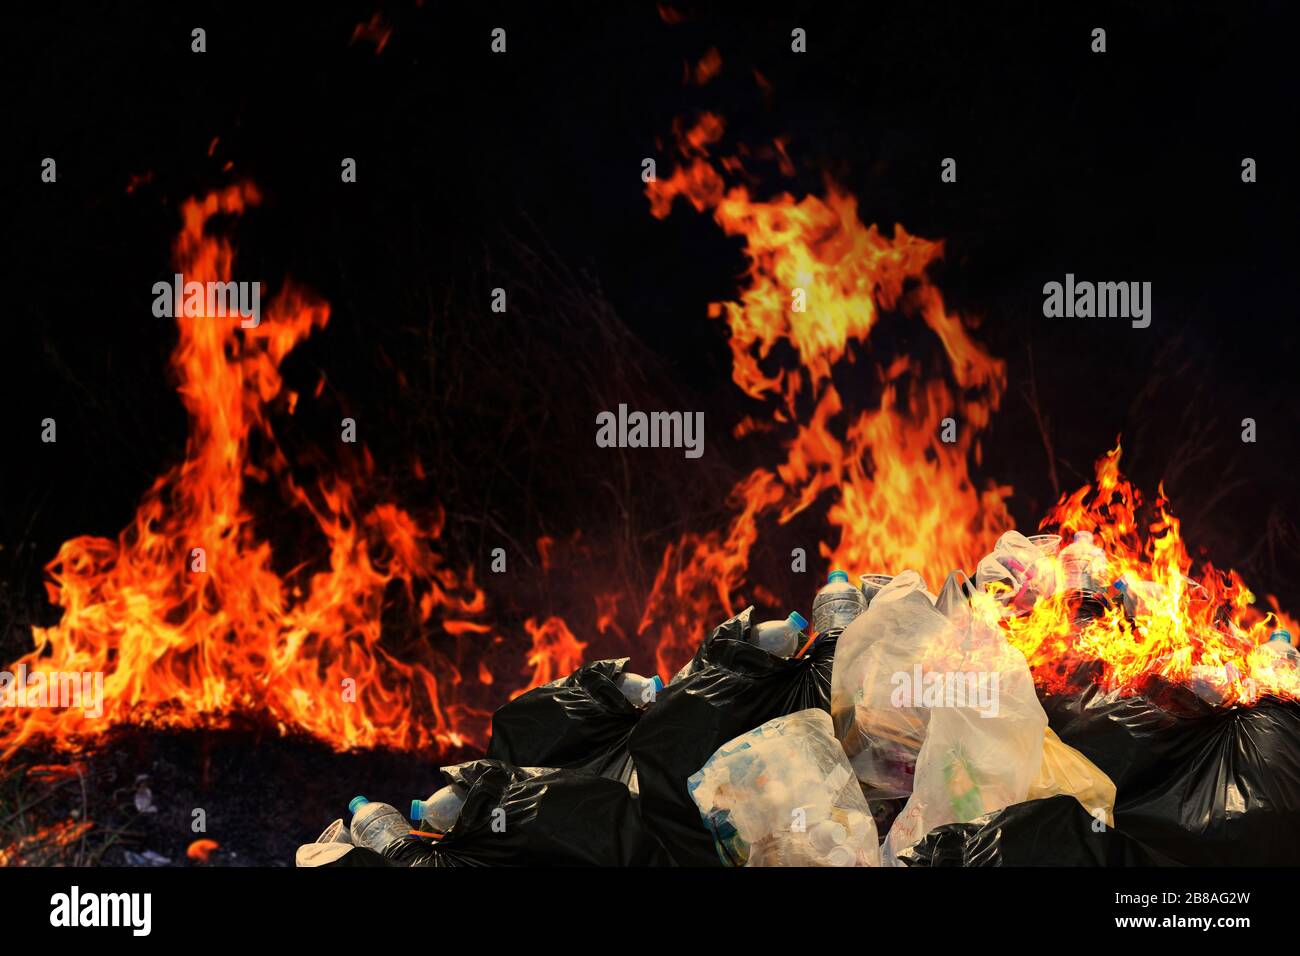 Burn a lot of waste plastic garbage, Garbage bin pile Dump Lots of junk Polluting with Plastic Burning heap of smoke from a burning pile of many garba Stock Photo